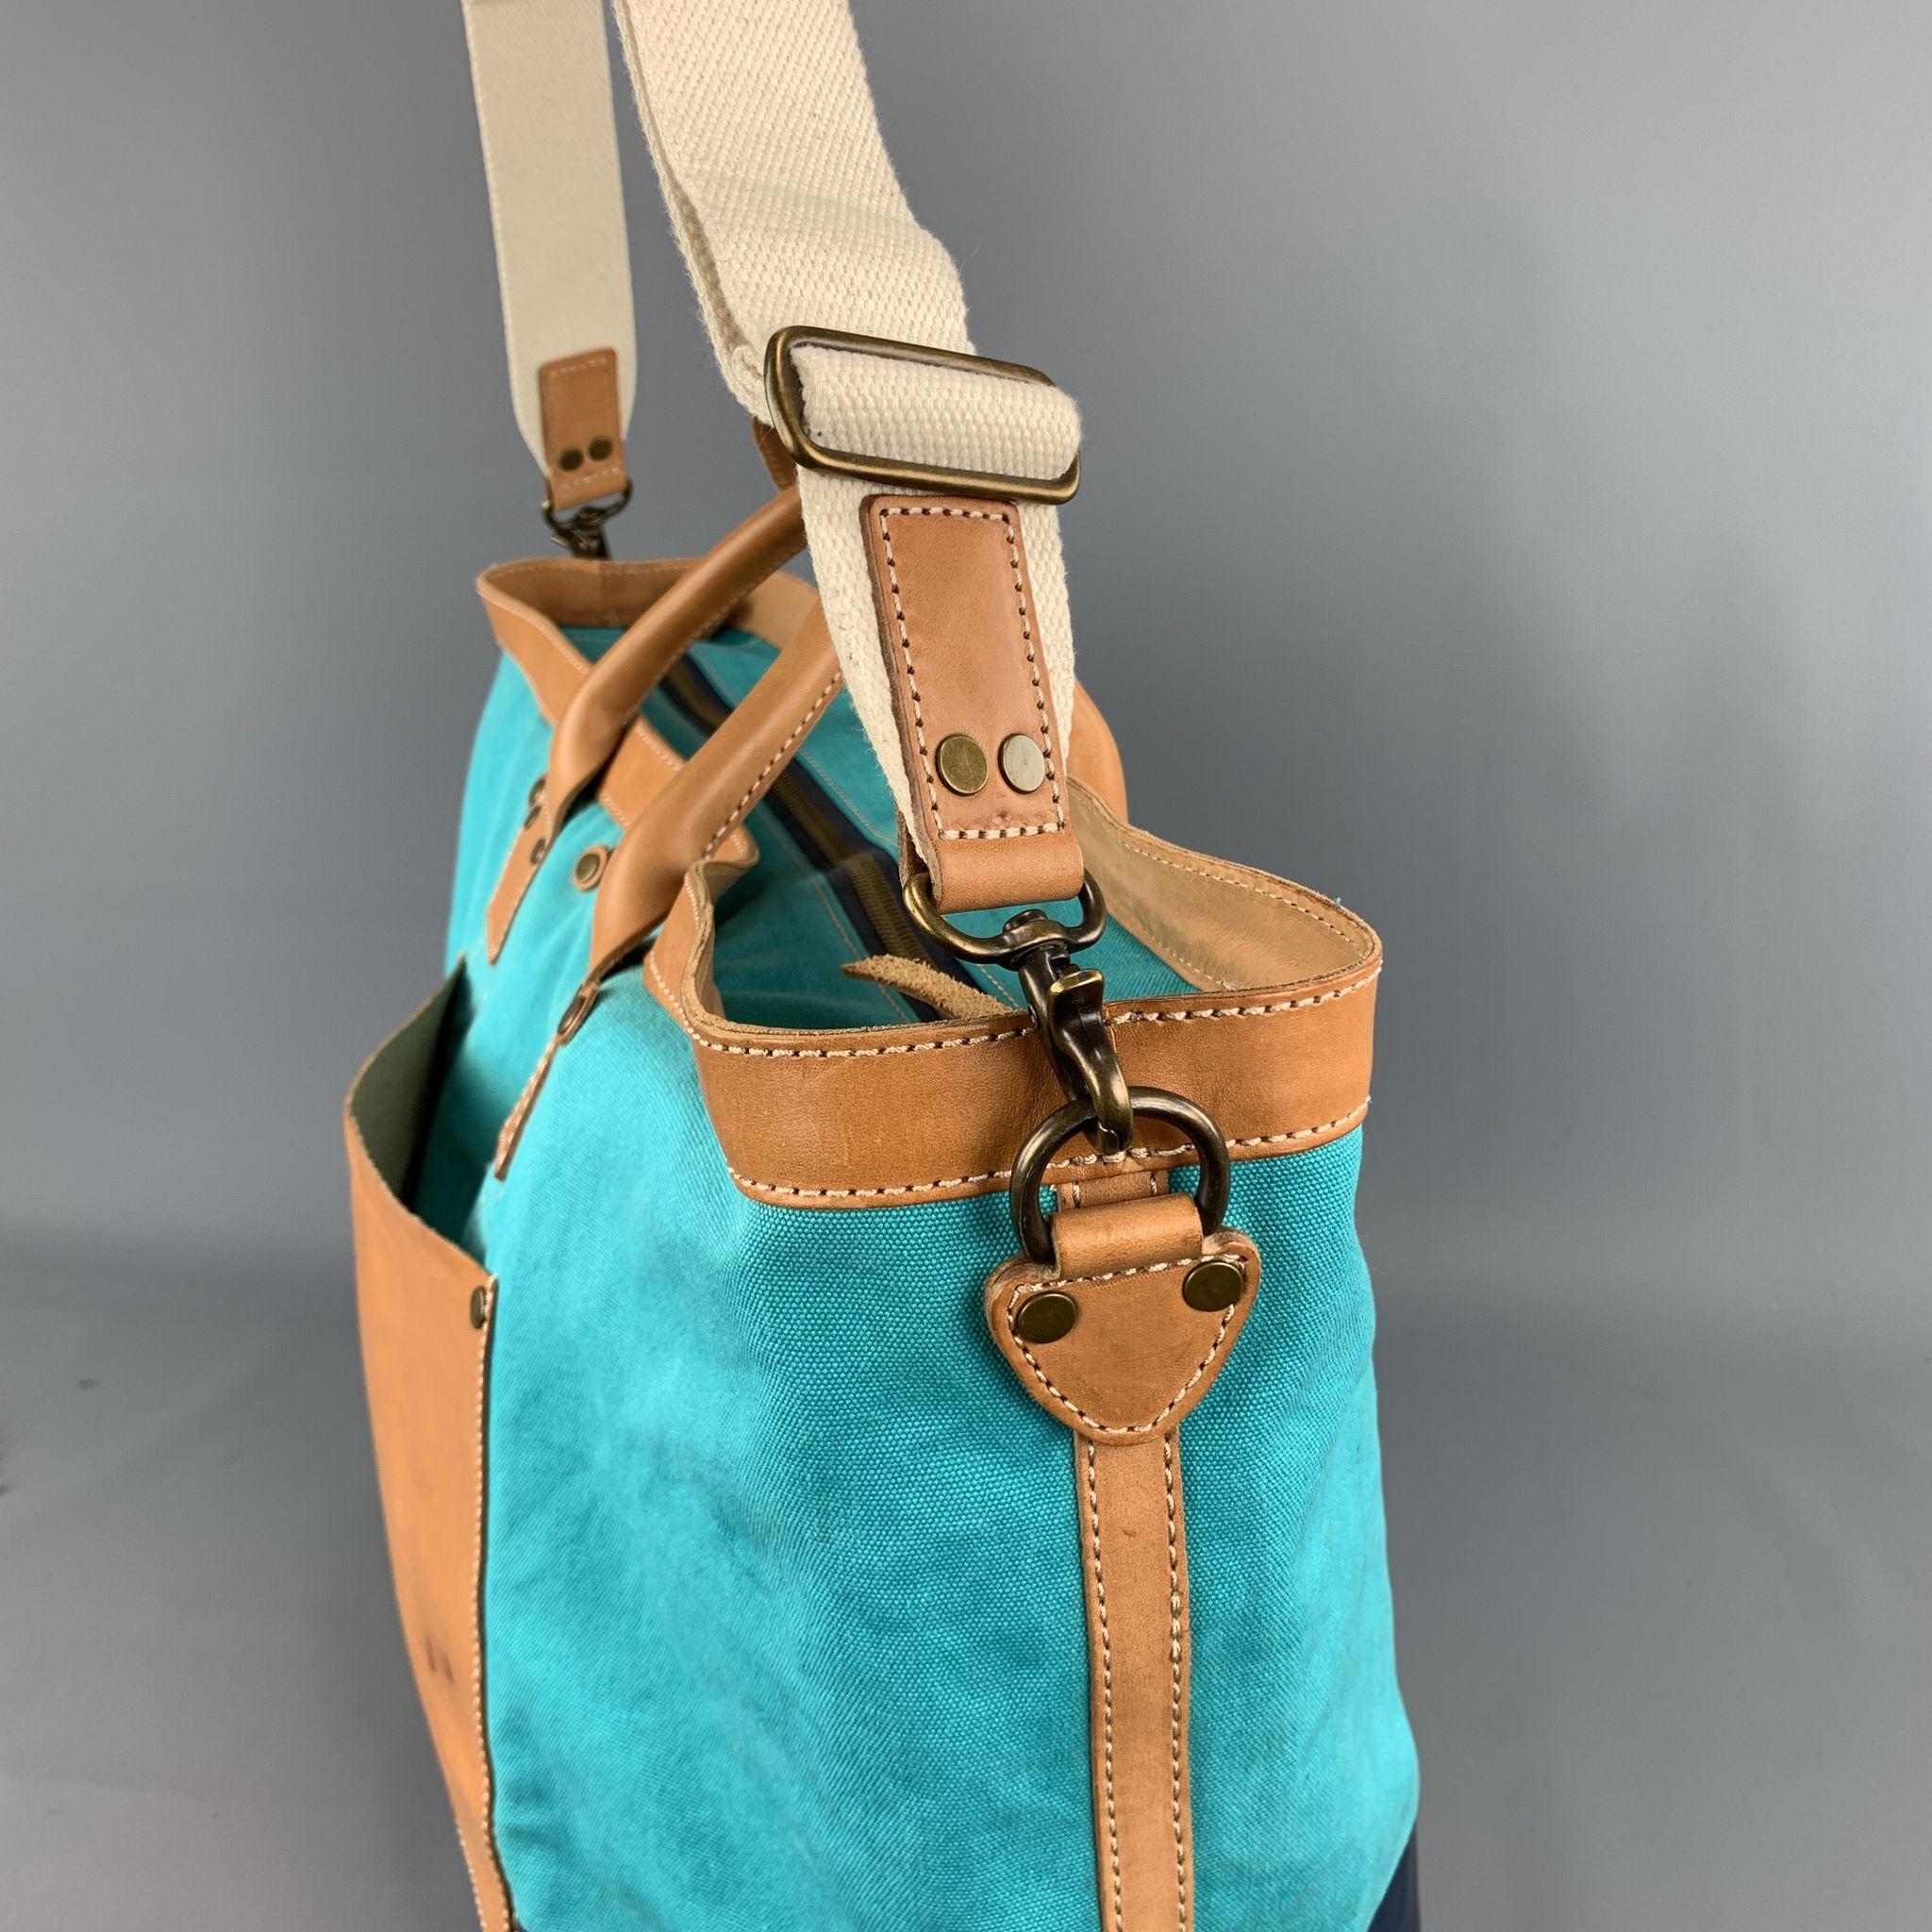 COLE HAAN Aqua & Navy Canvas Leather Two Tone Tote Bag 3